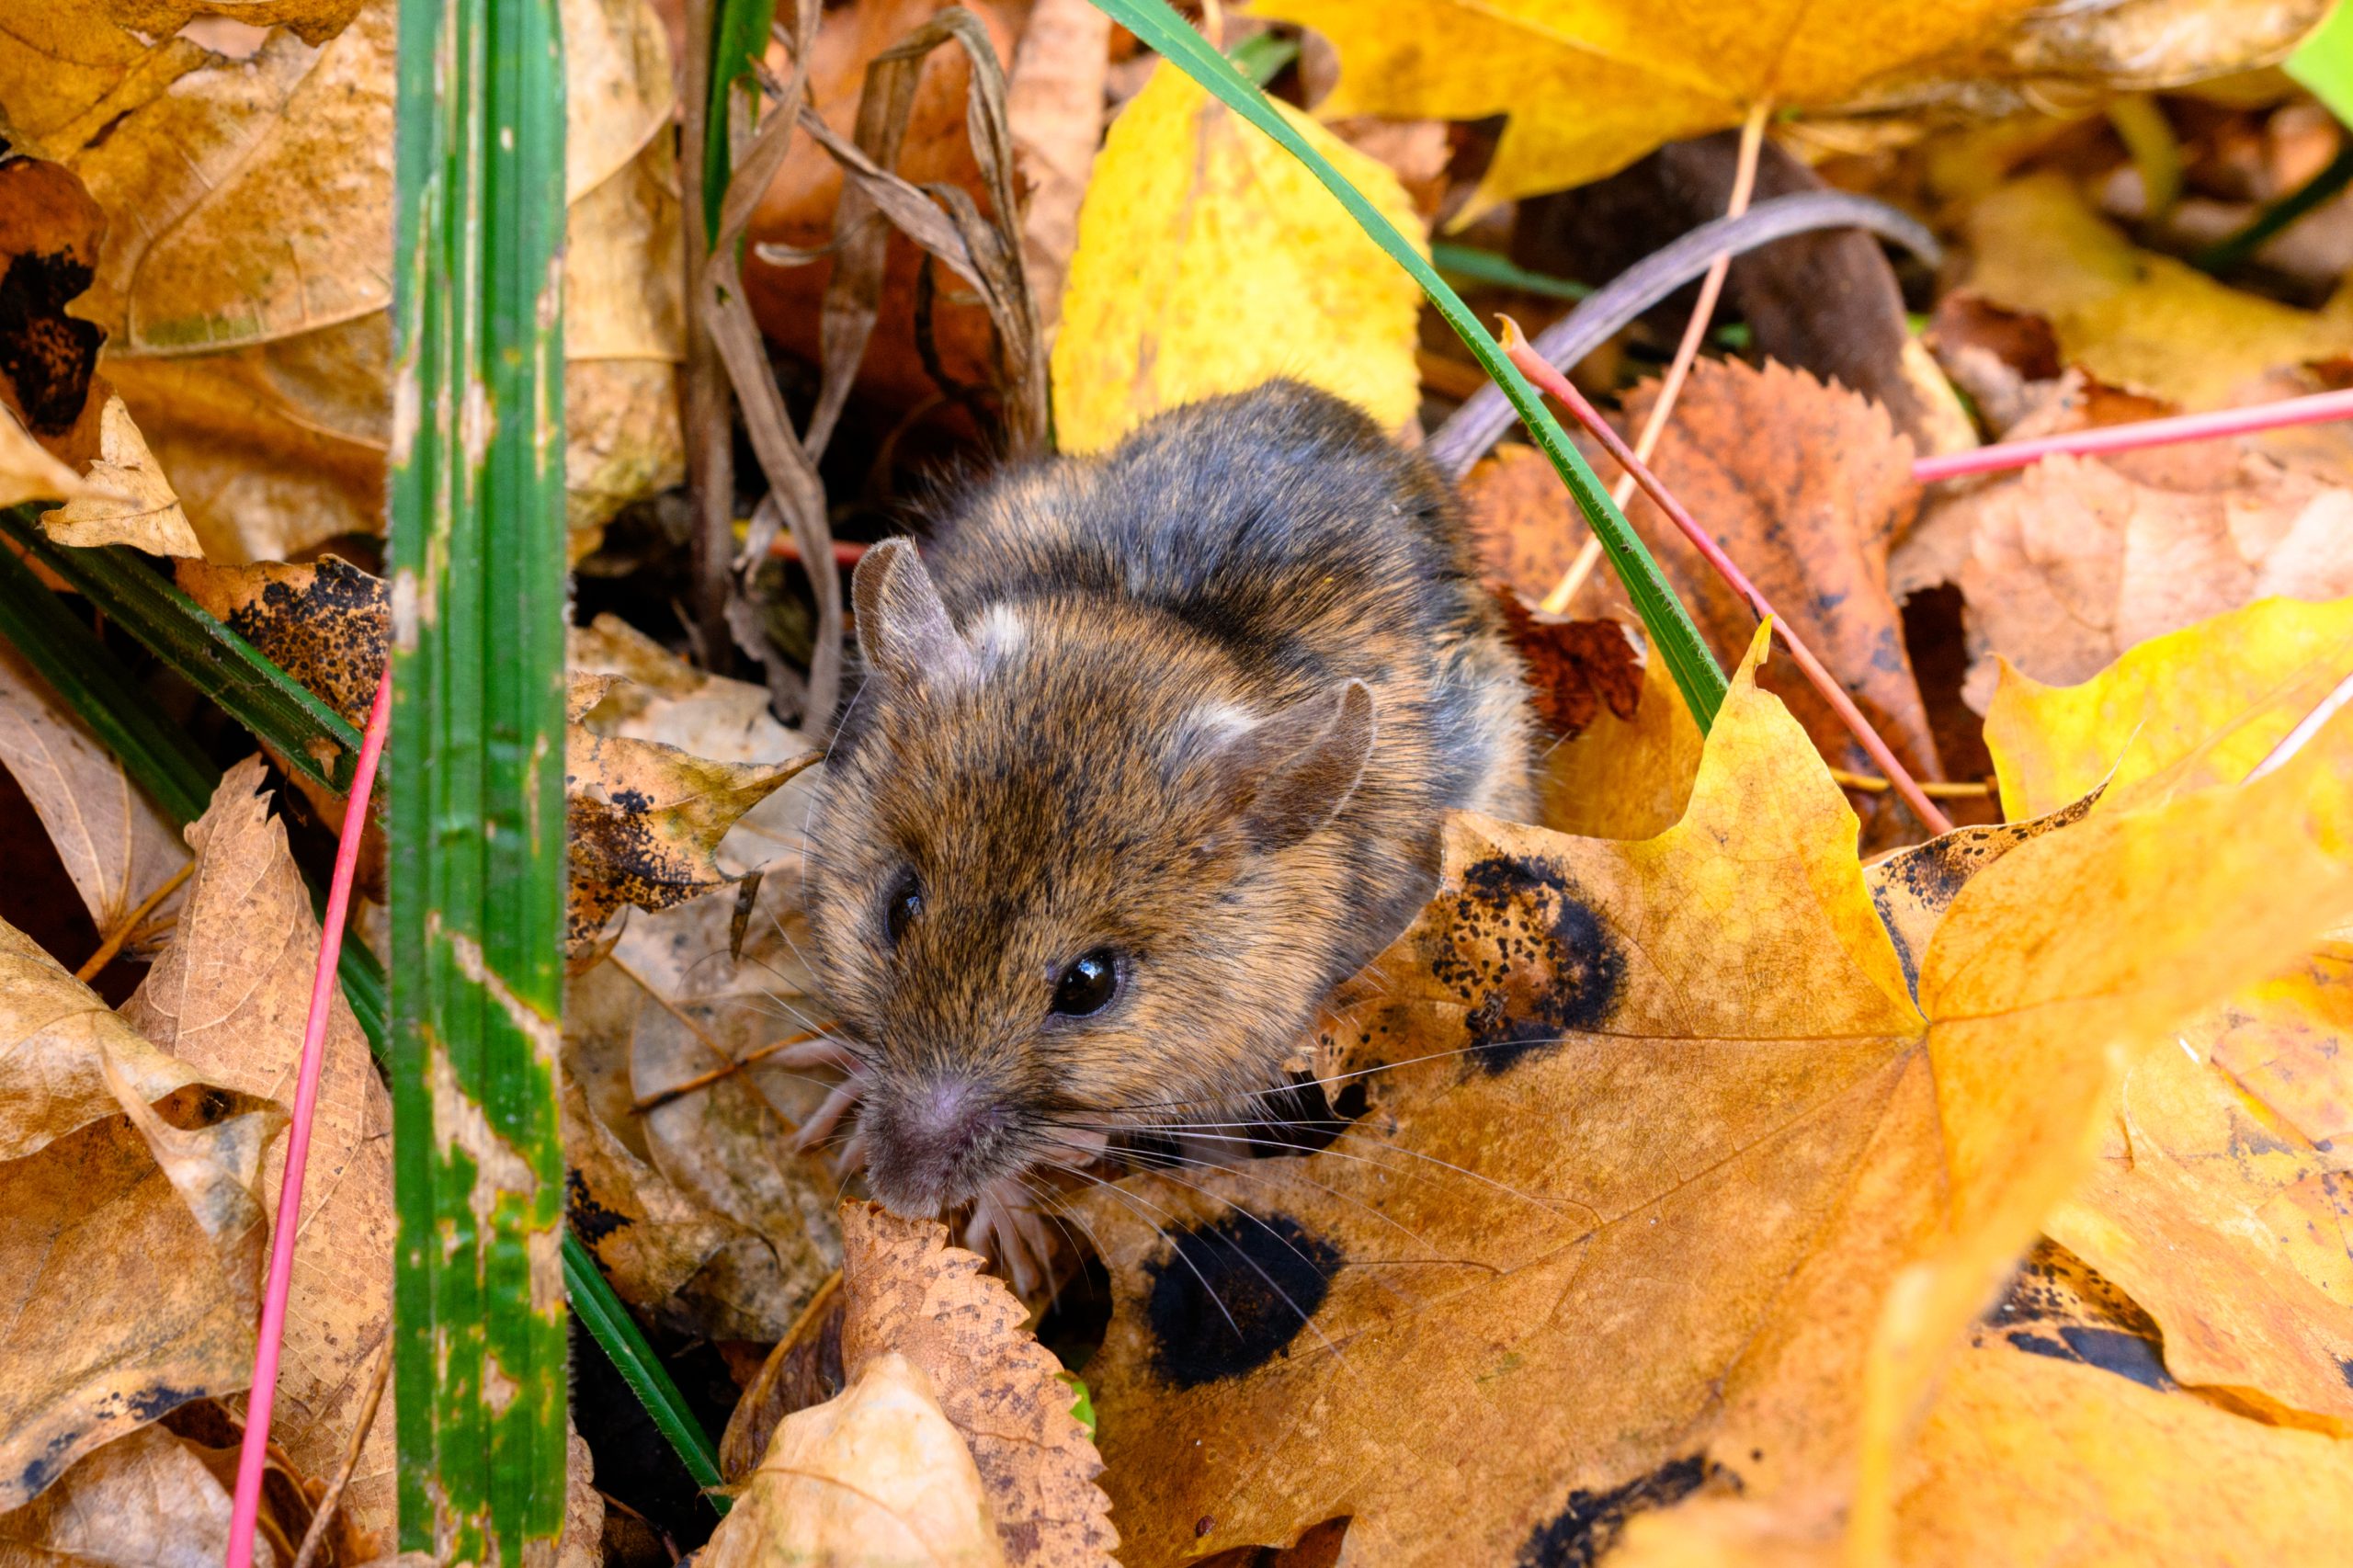 The striped field mouse, apodemus agrarius, sits among yellow leaves in autumn forest. The mouse of the autumn forest.